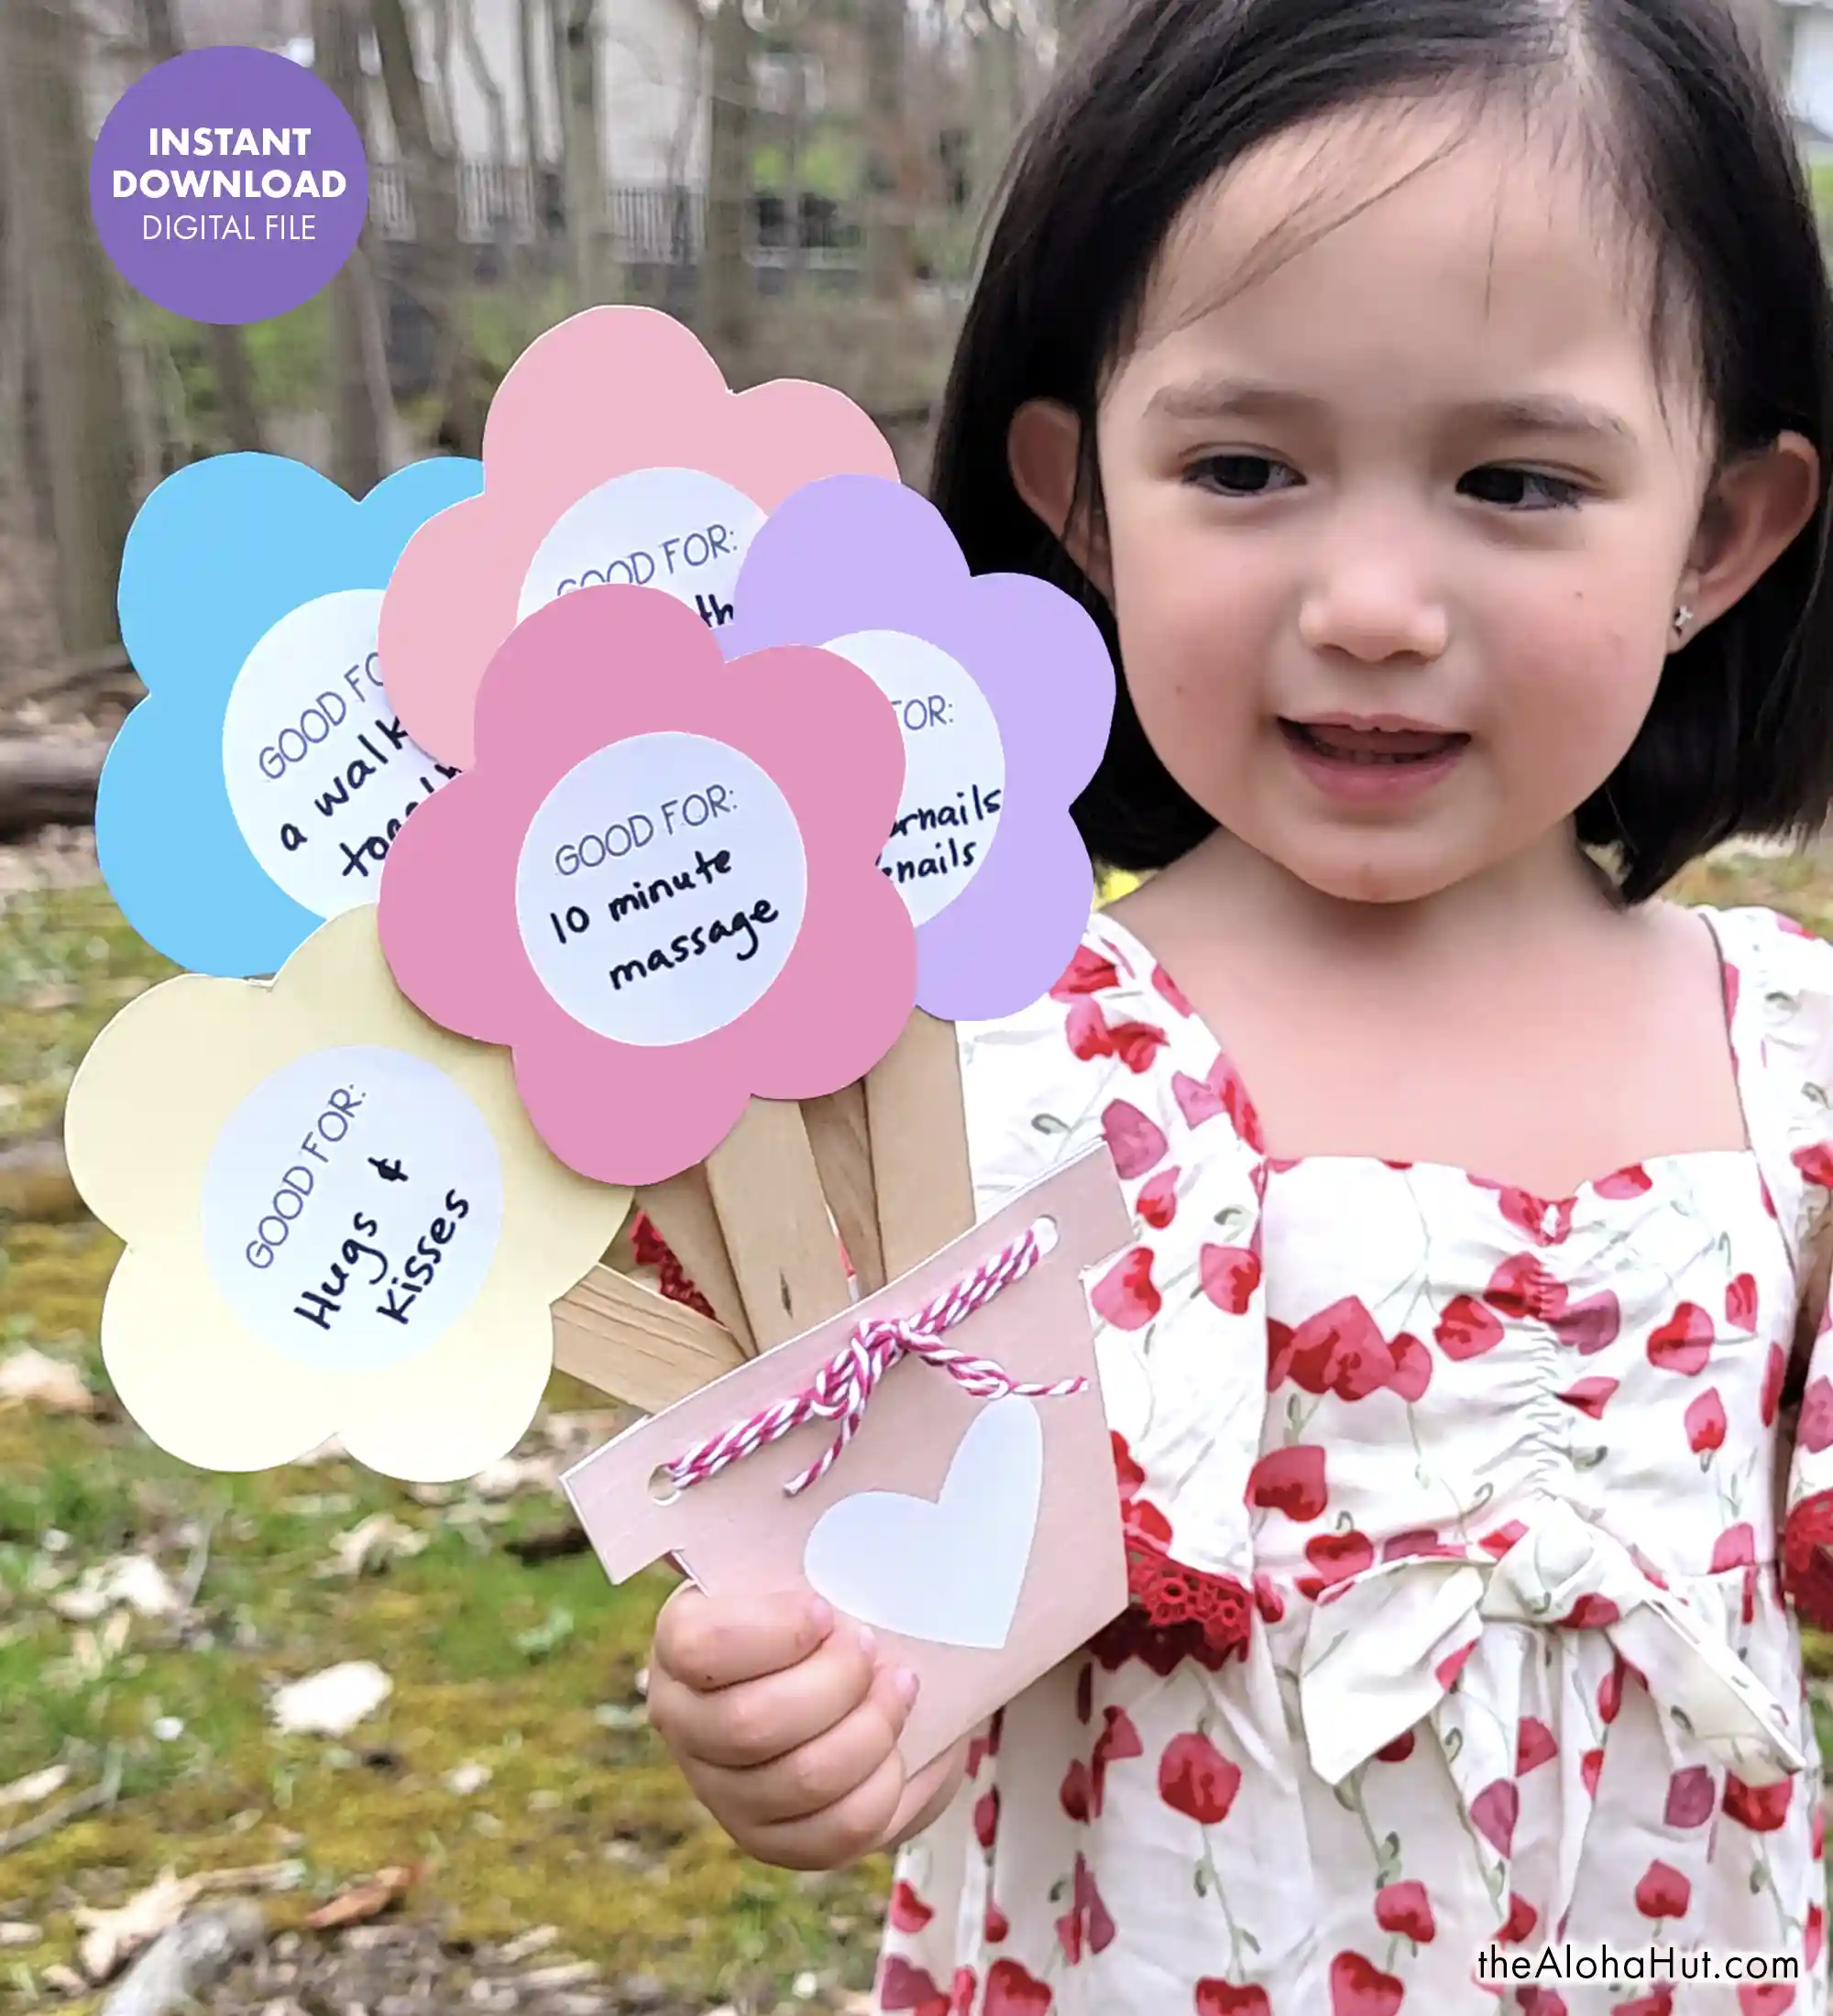 Easy Mother's Day gift idea for mom and/or grandma. Download the printable flowers and turn them into a coupon booklet for mom or grandma! Personalize your bouquet of flowers with acts of service and fun things you can do with mom or grandma.